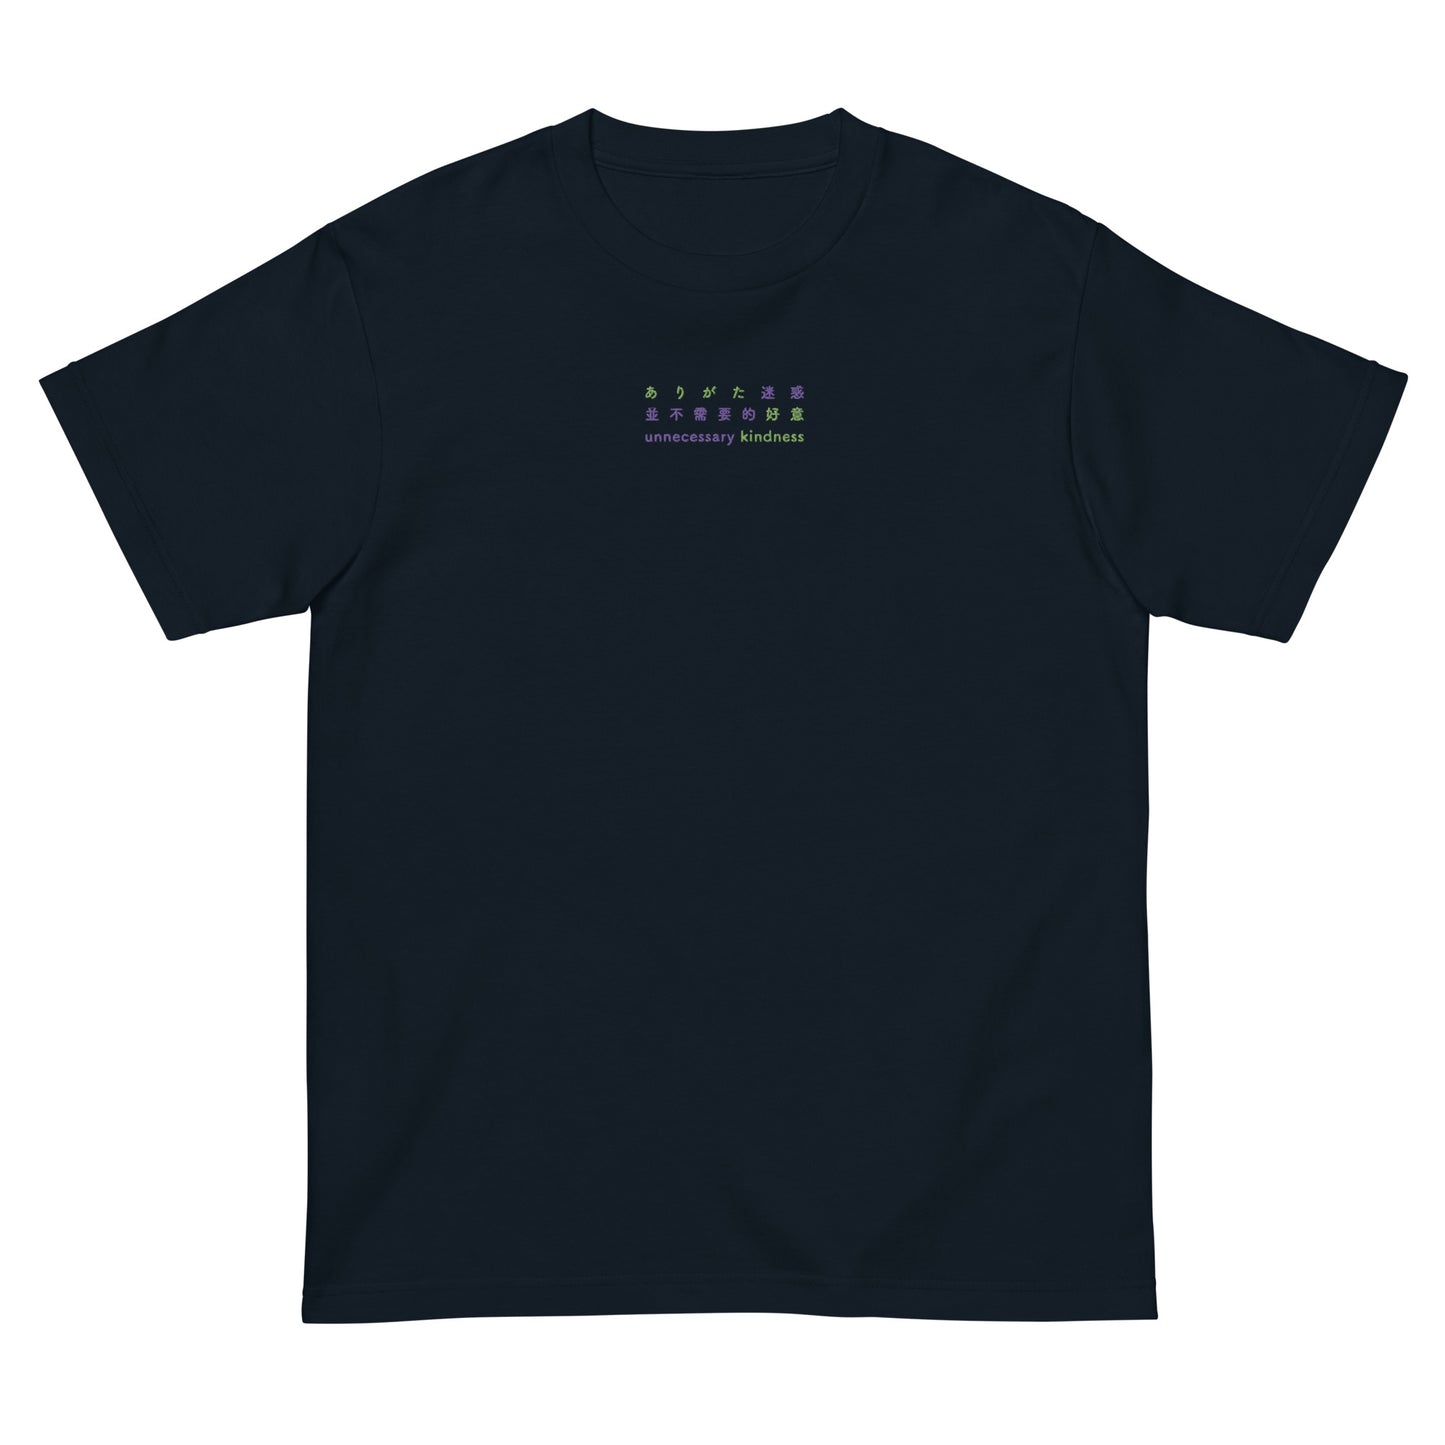 Navy High Quality Tee - Front Design with Green and Purple Embroidery "Unnecessary Kindness" in Japanese ,Chinese and English